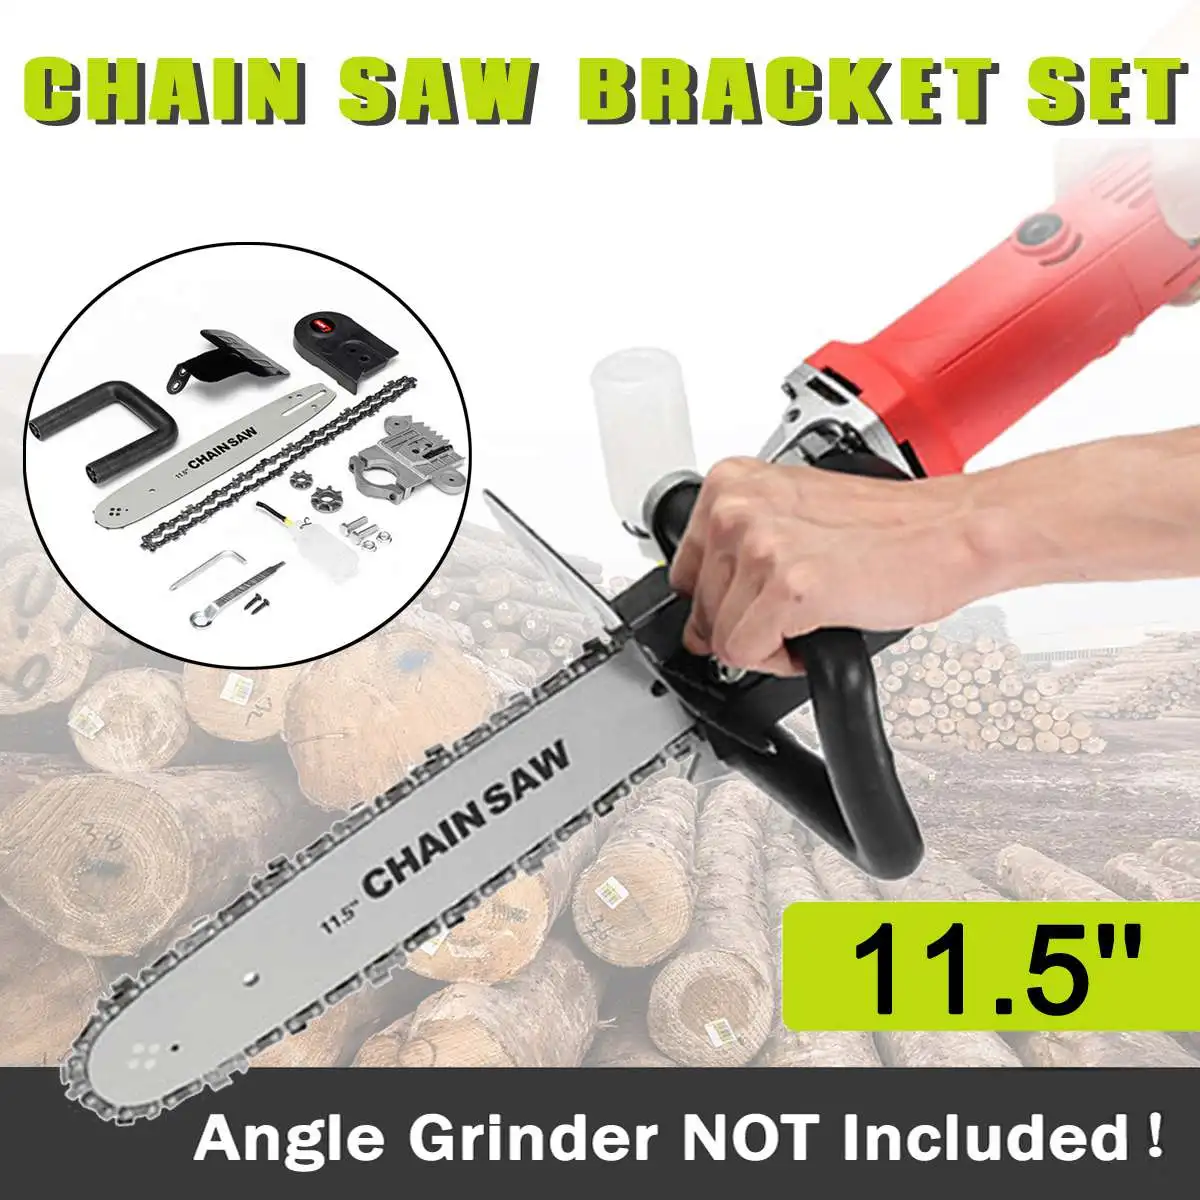 Drillpro Chainsaw Bracket Tool Set For Angle Grinder 